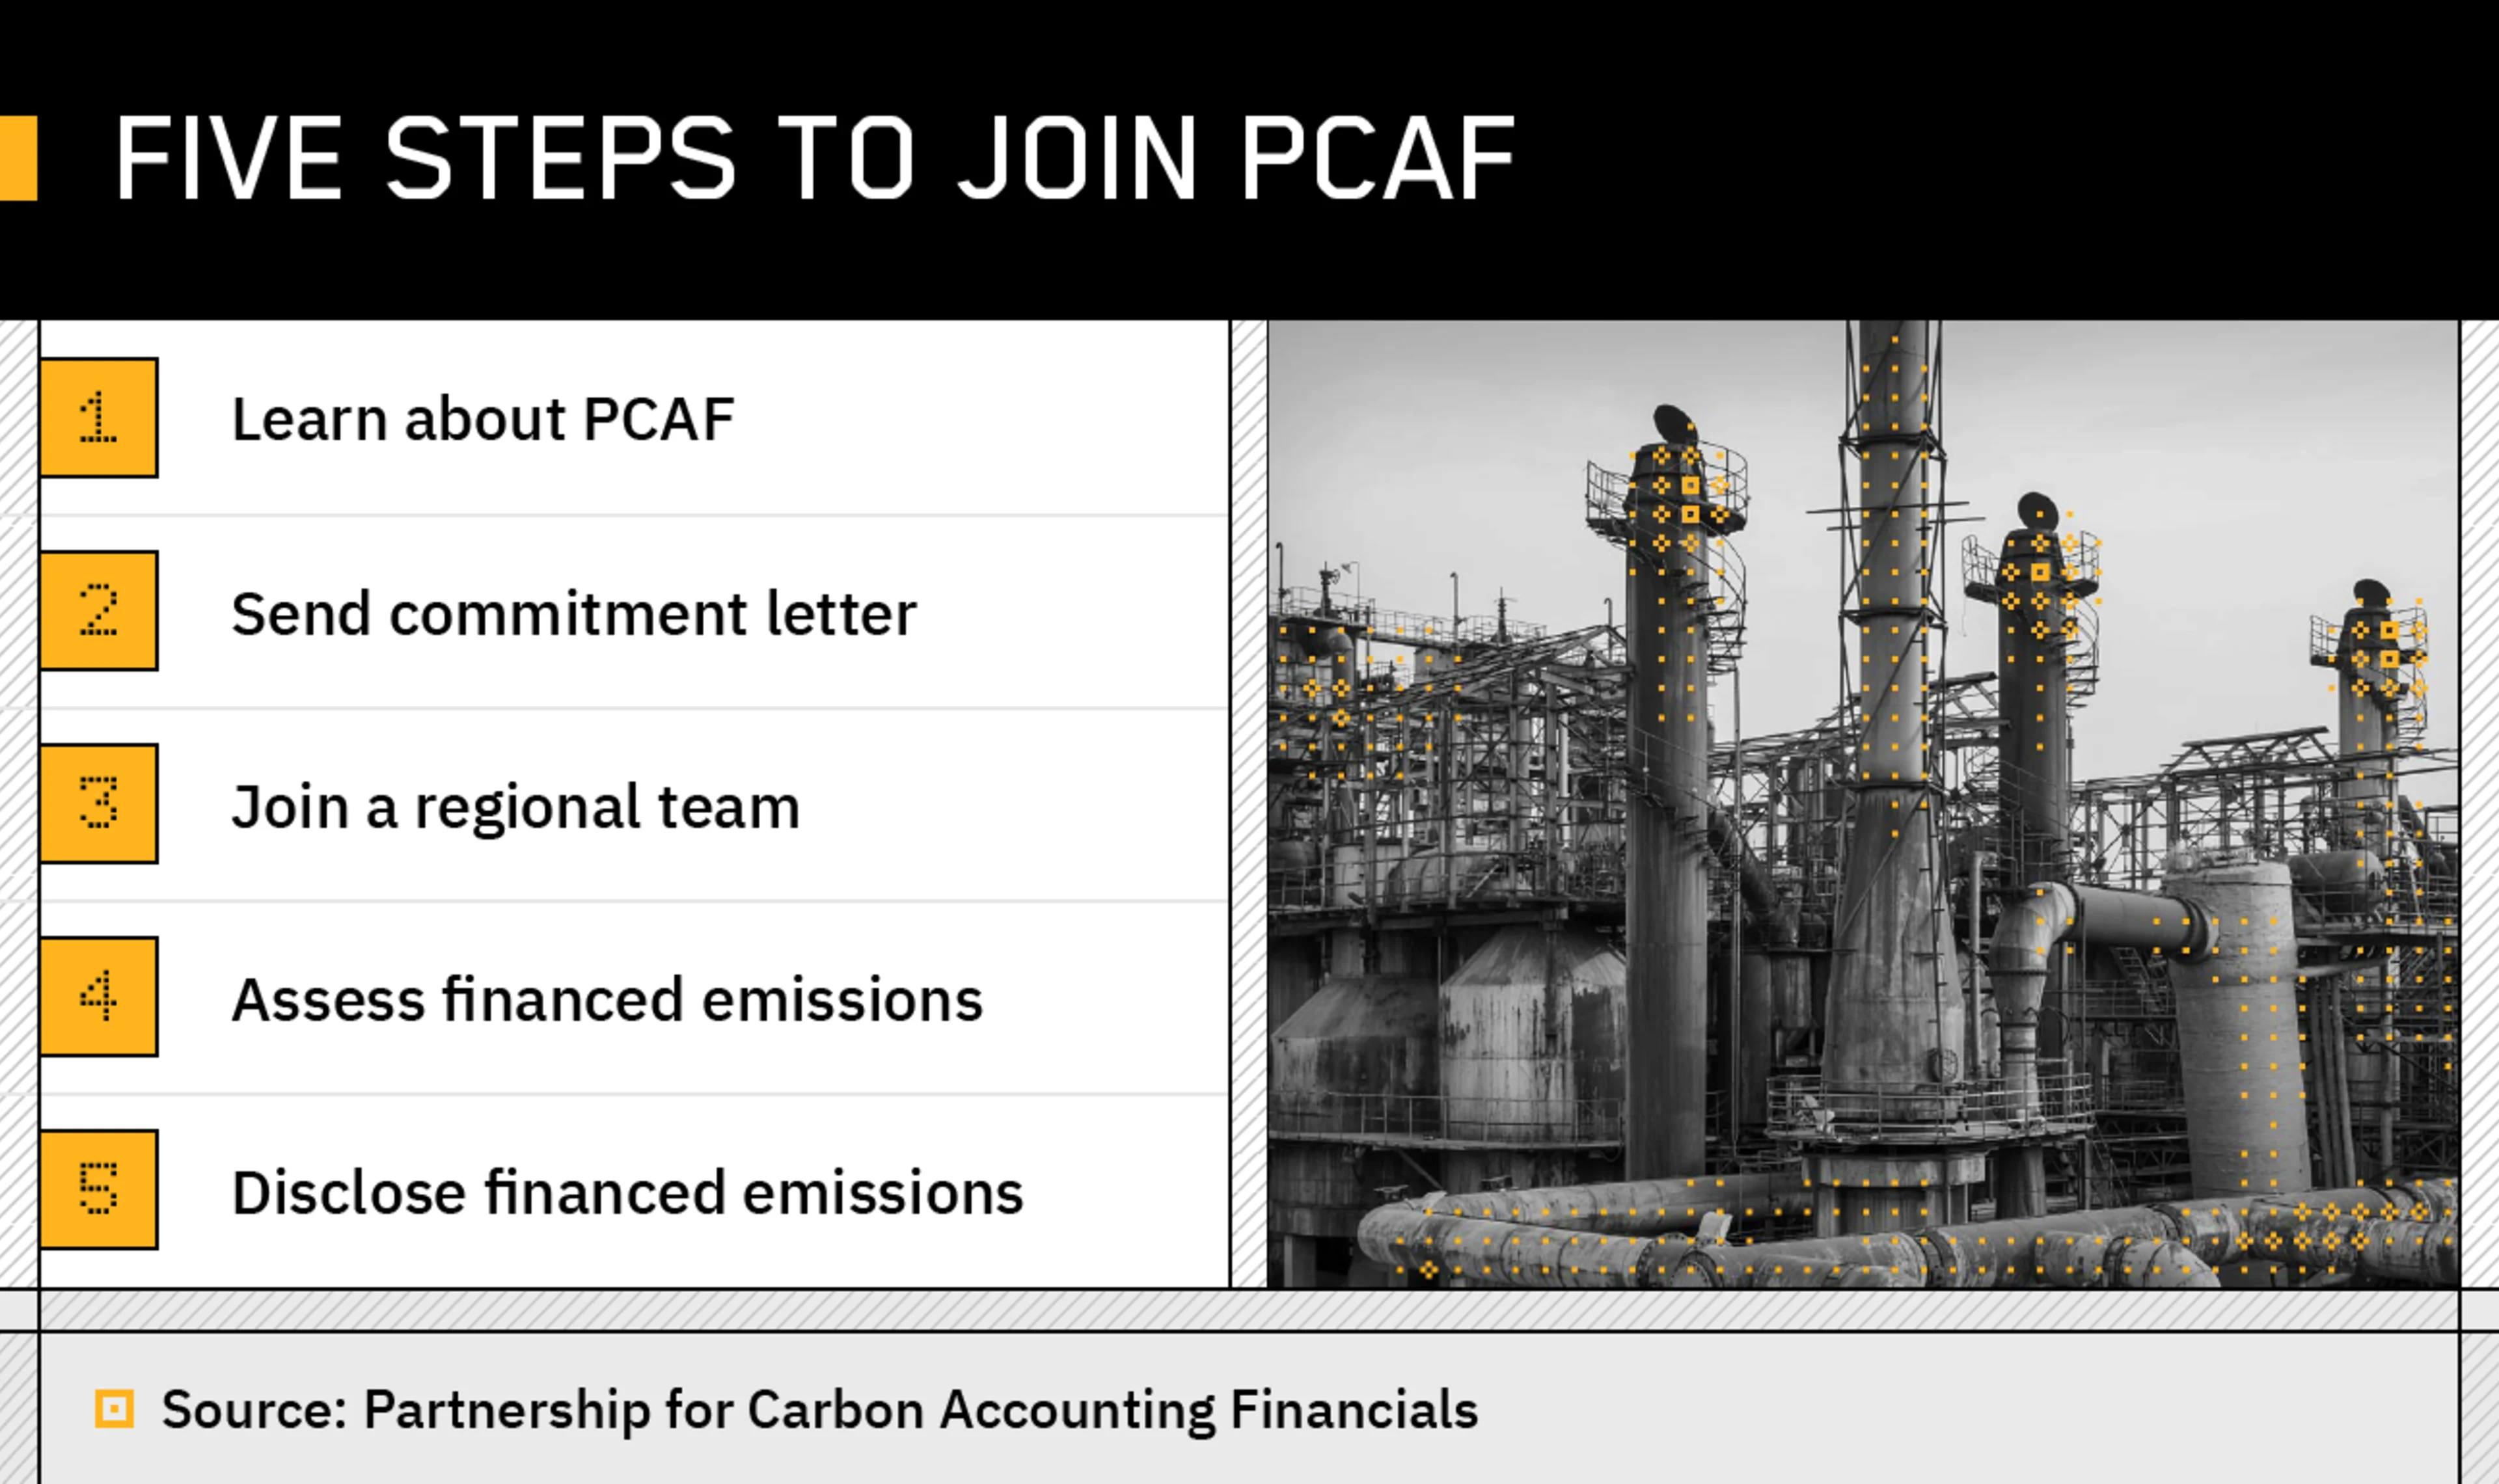 Joining PCAF